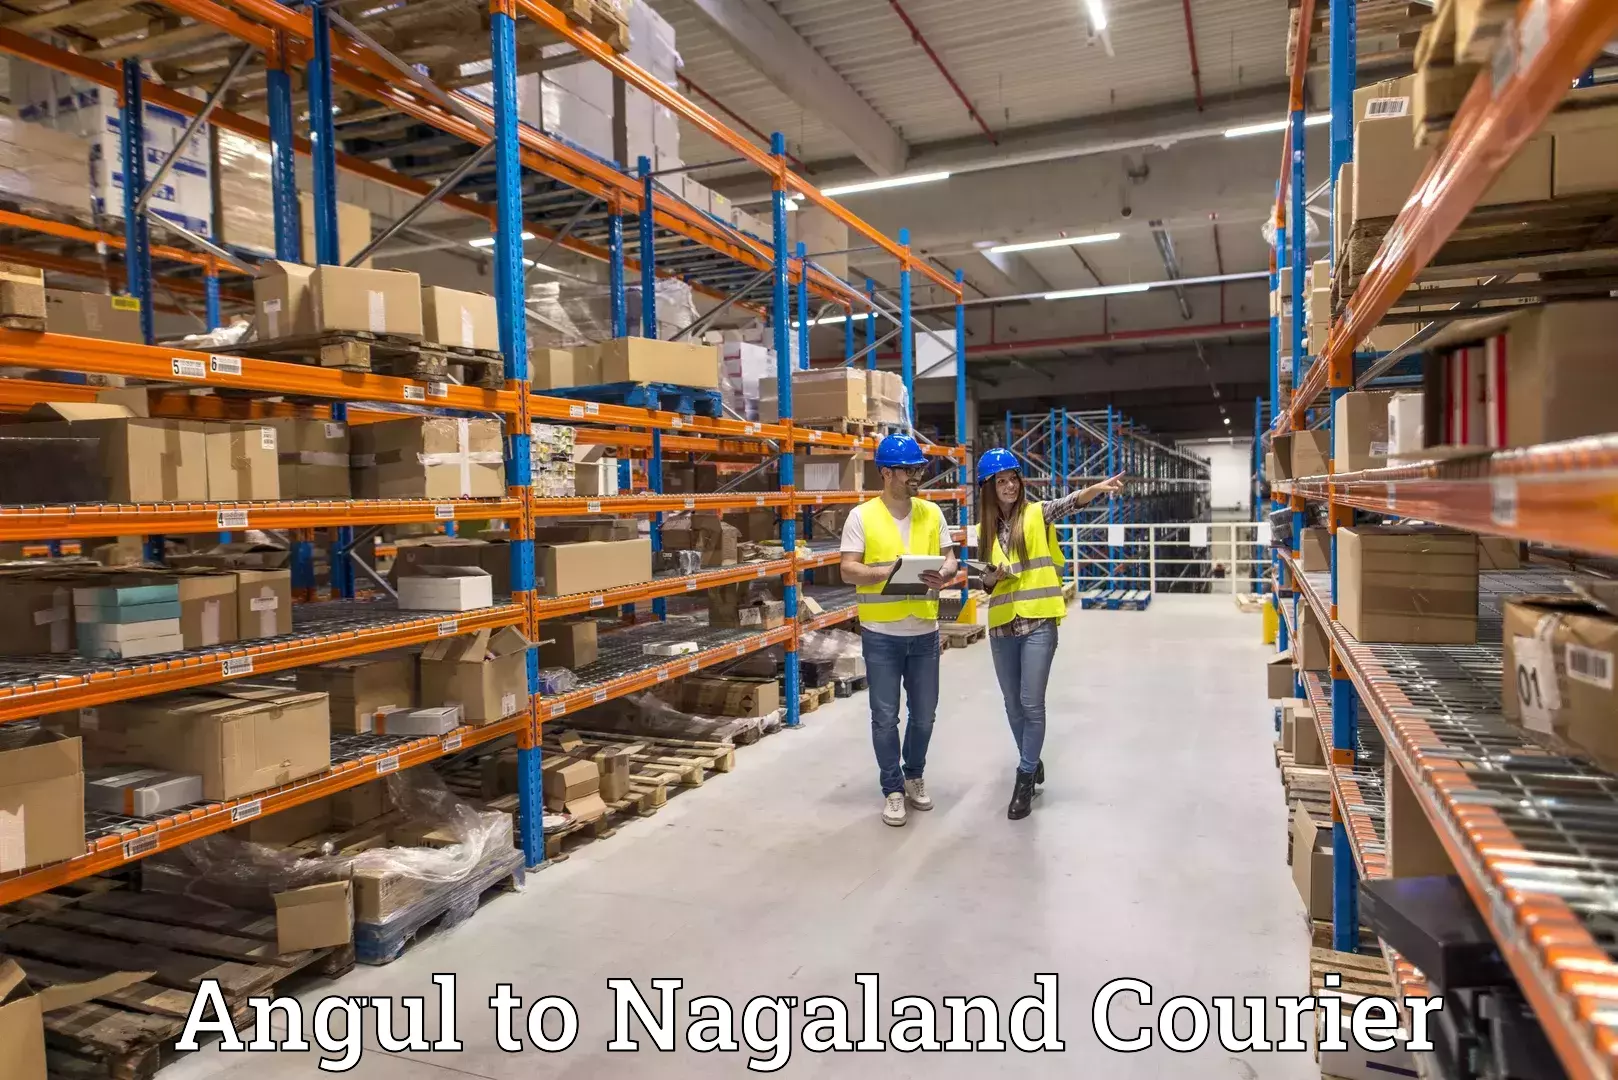 Express delivery capabilities Angul to Nagaland